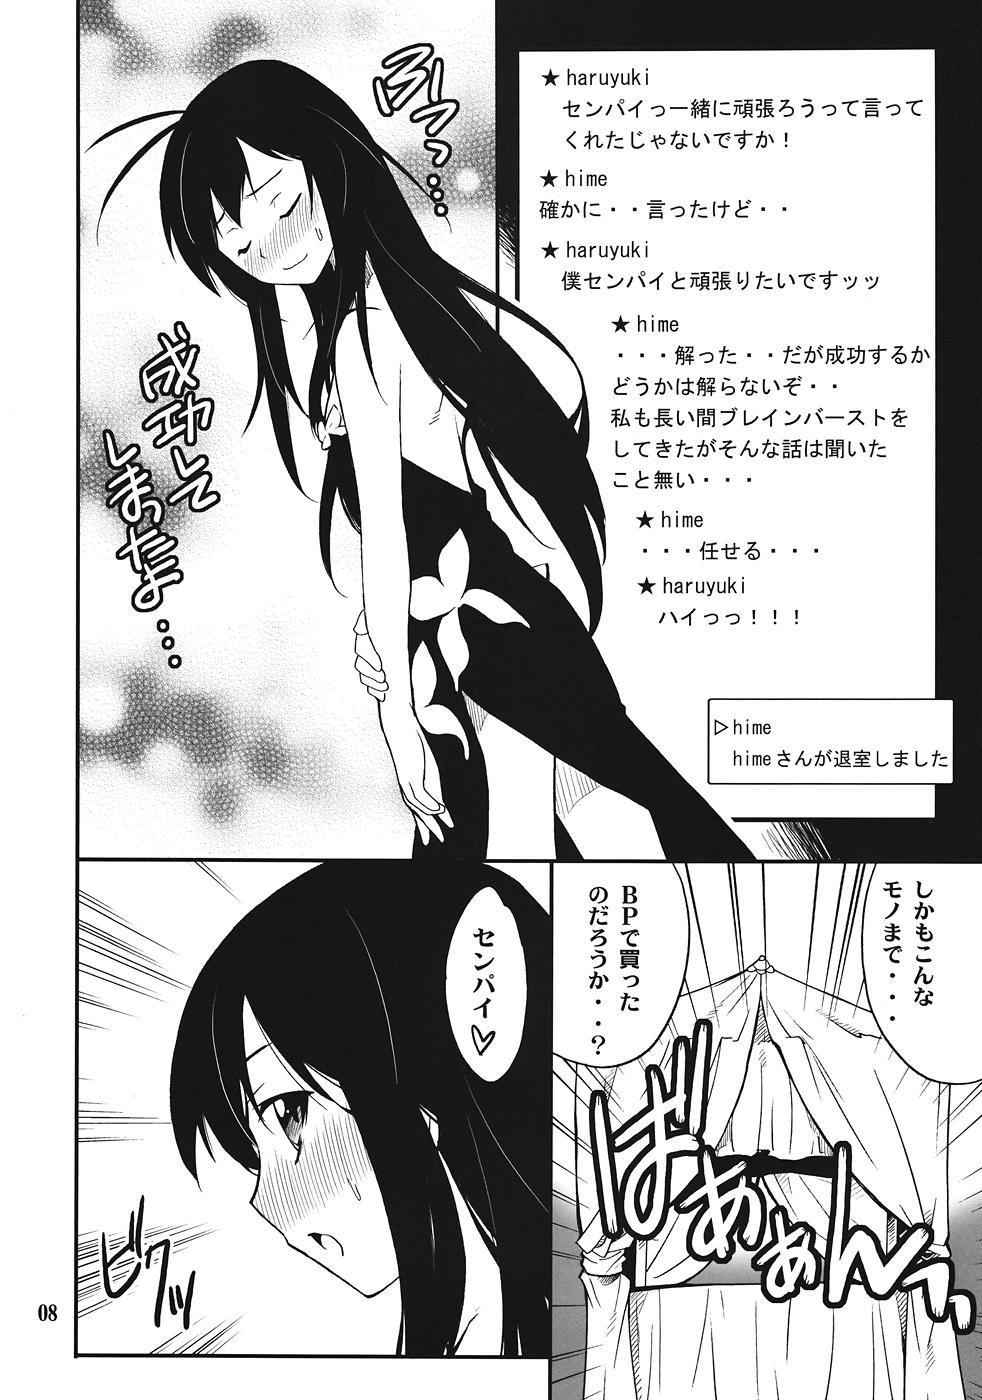 Gaycum Another World - Accel world Morocha - Page 7